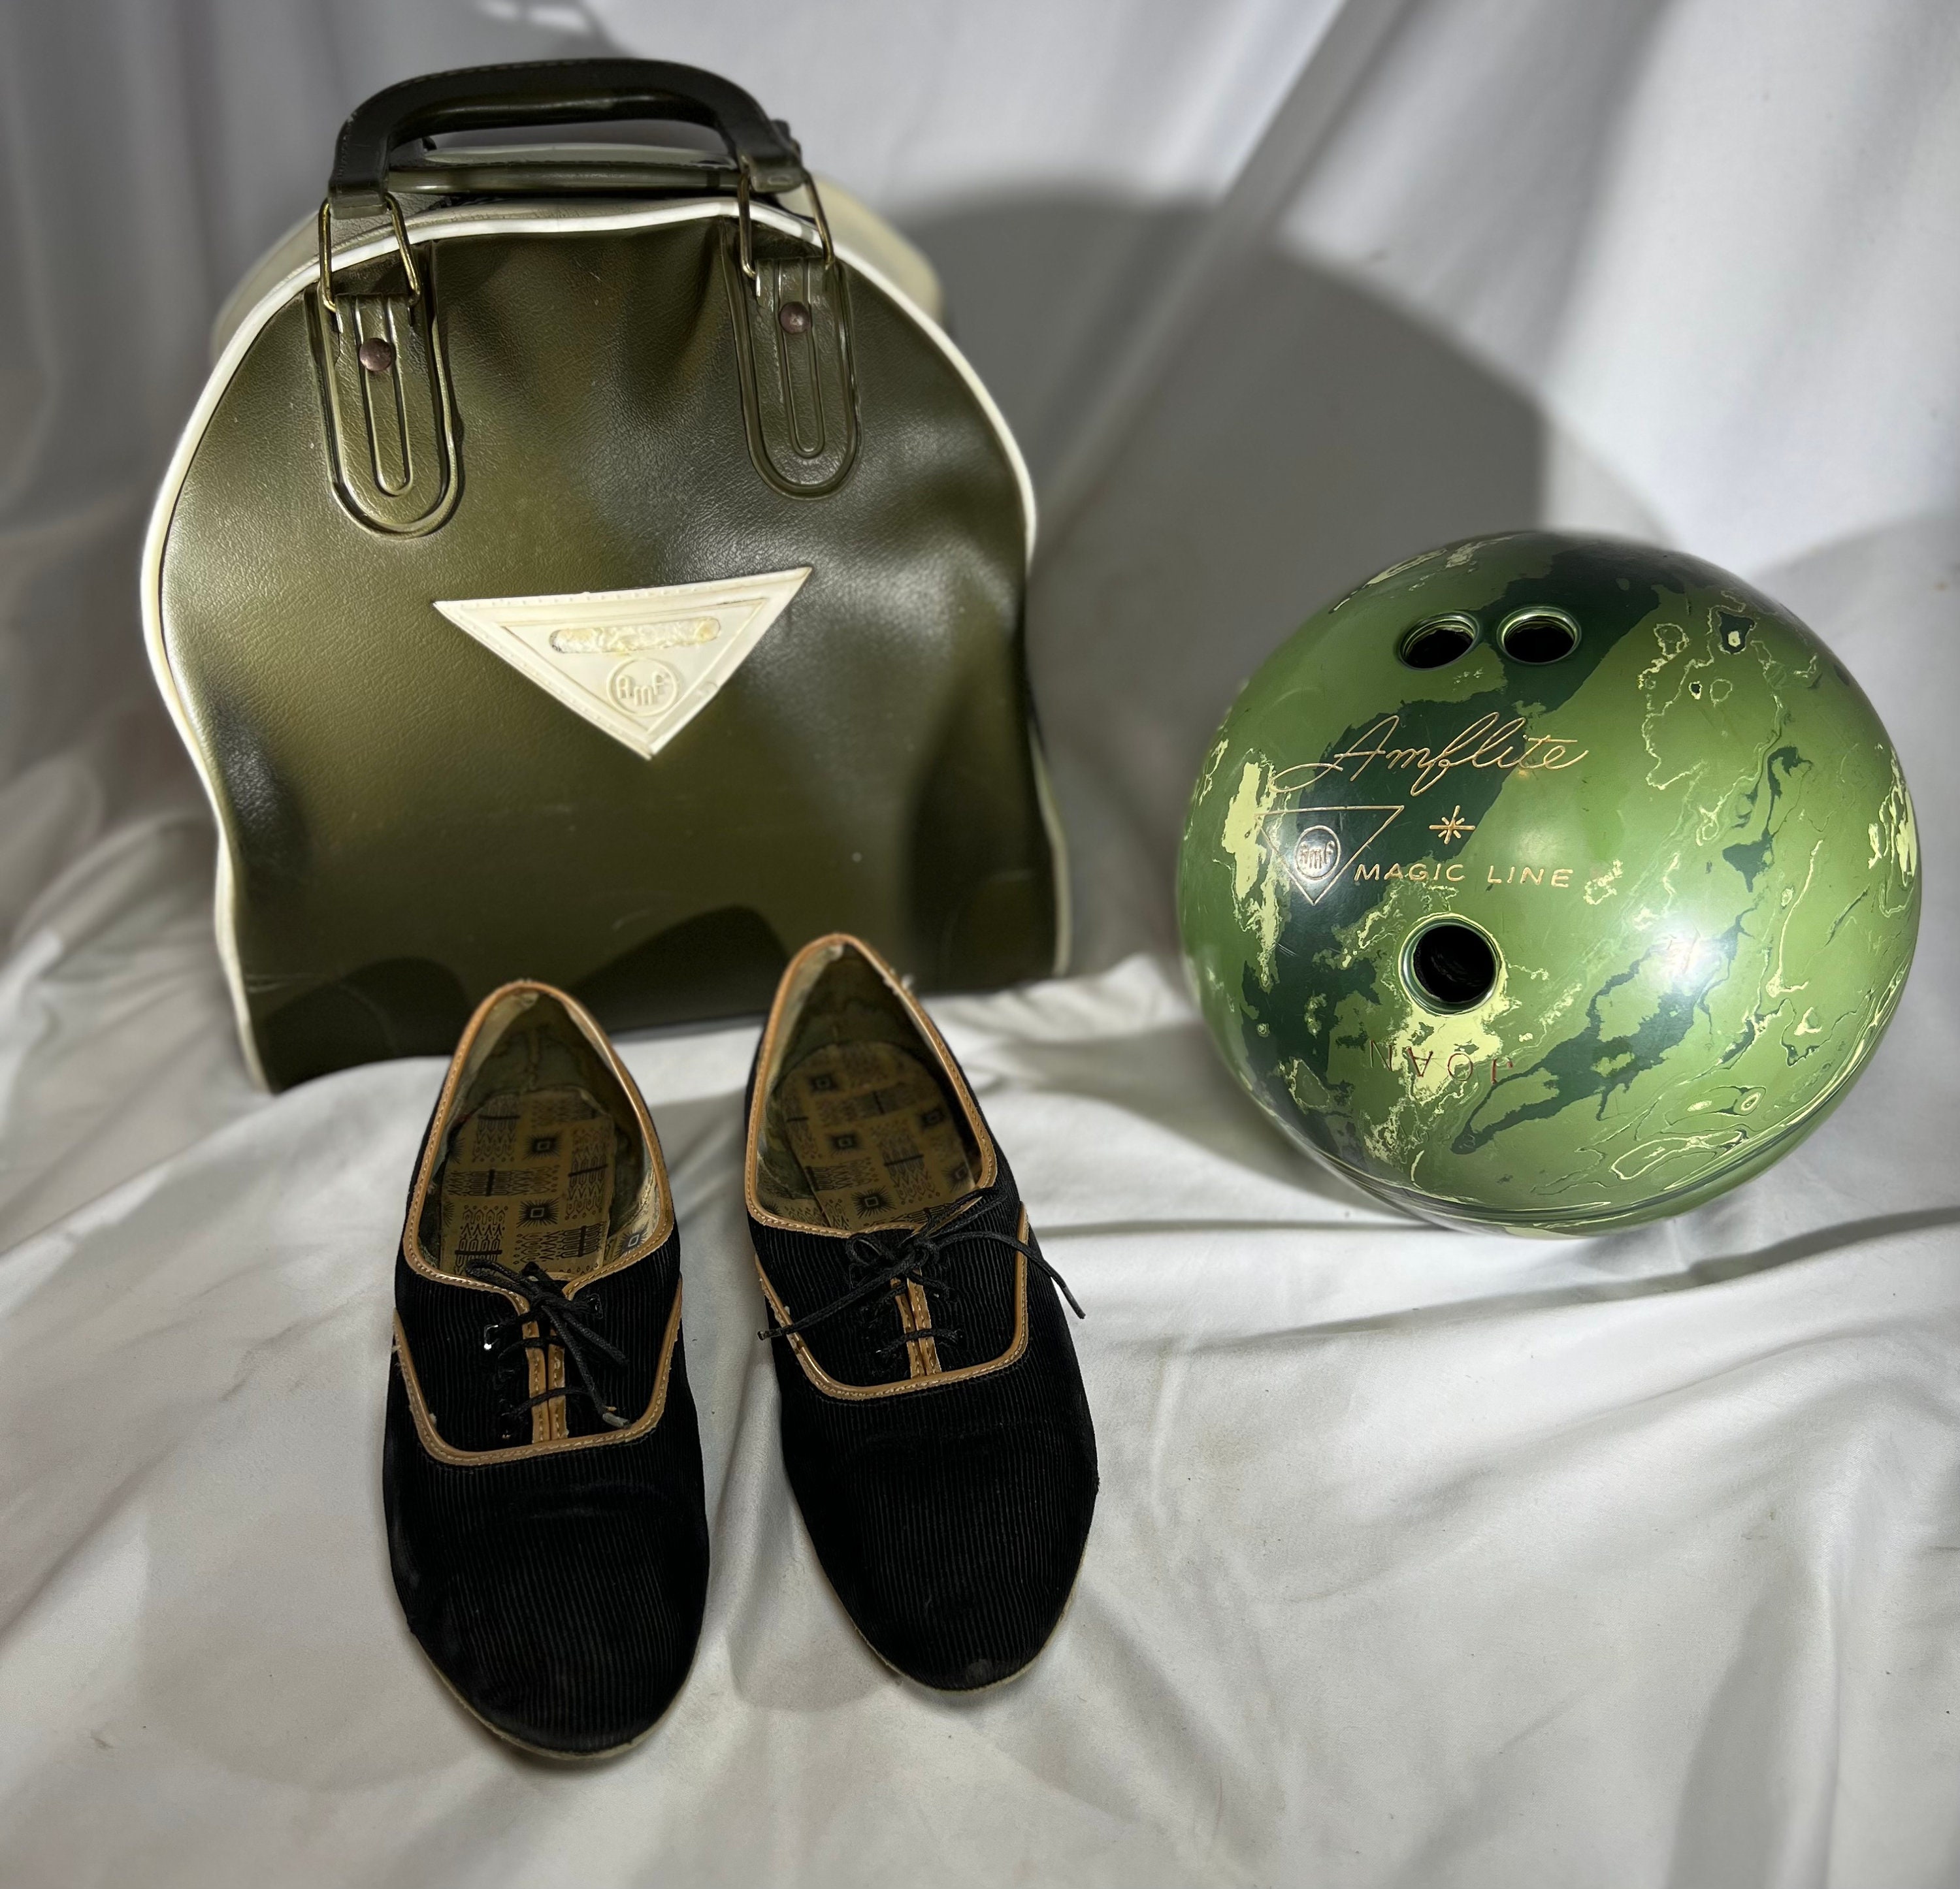 Vintage Bowling Ball Bag and Shoes Amflight AMF 